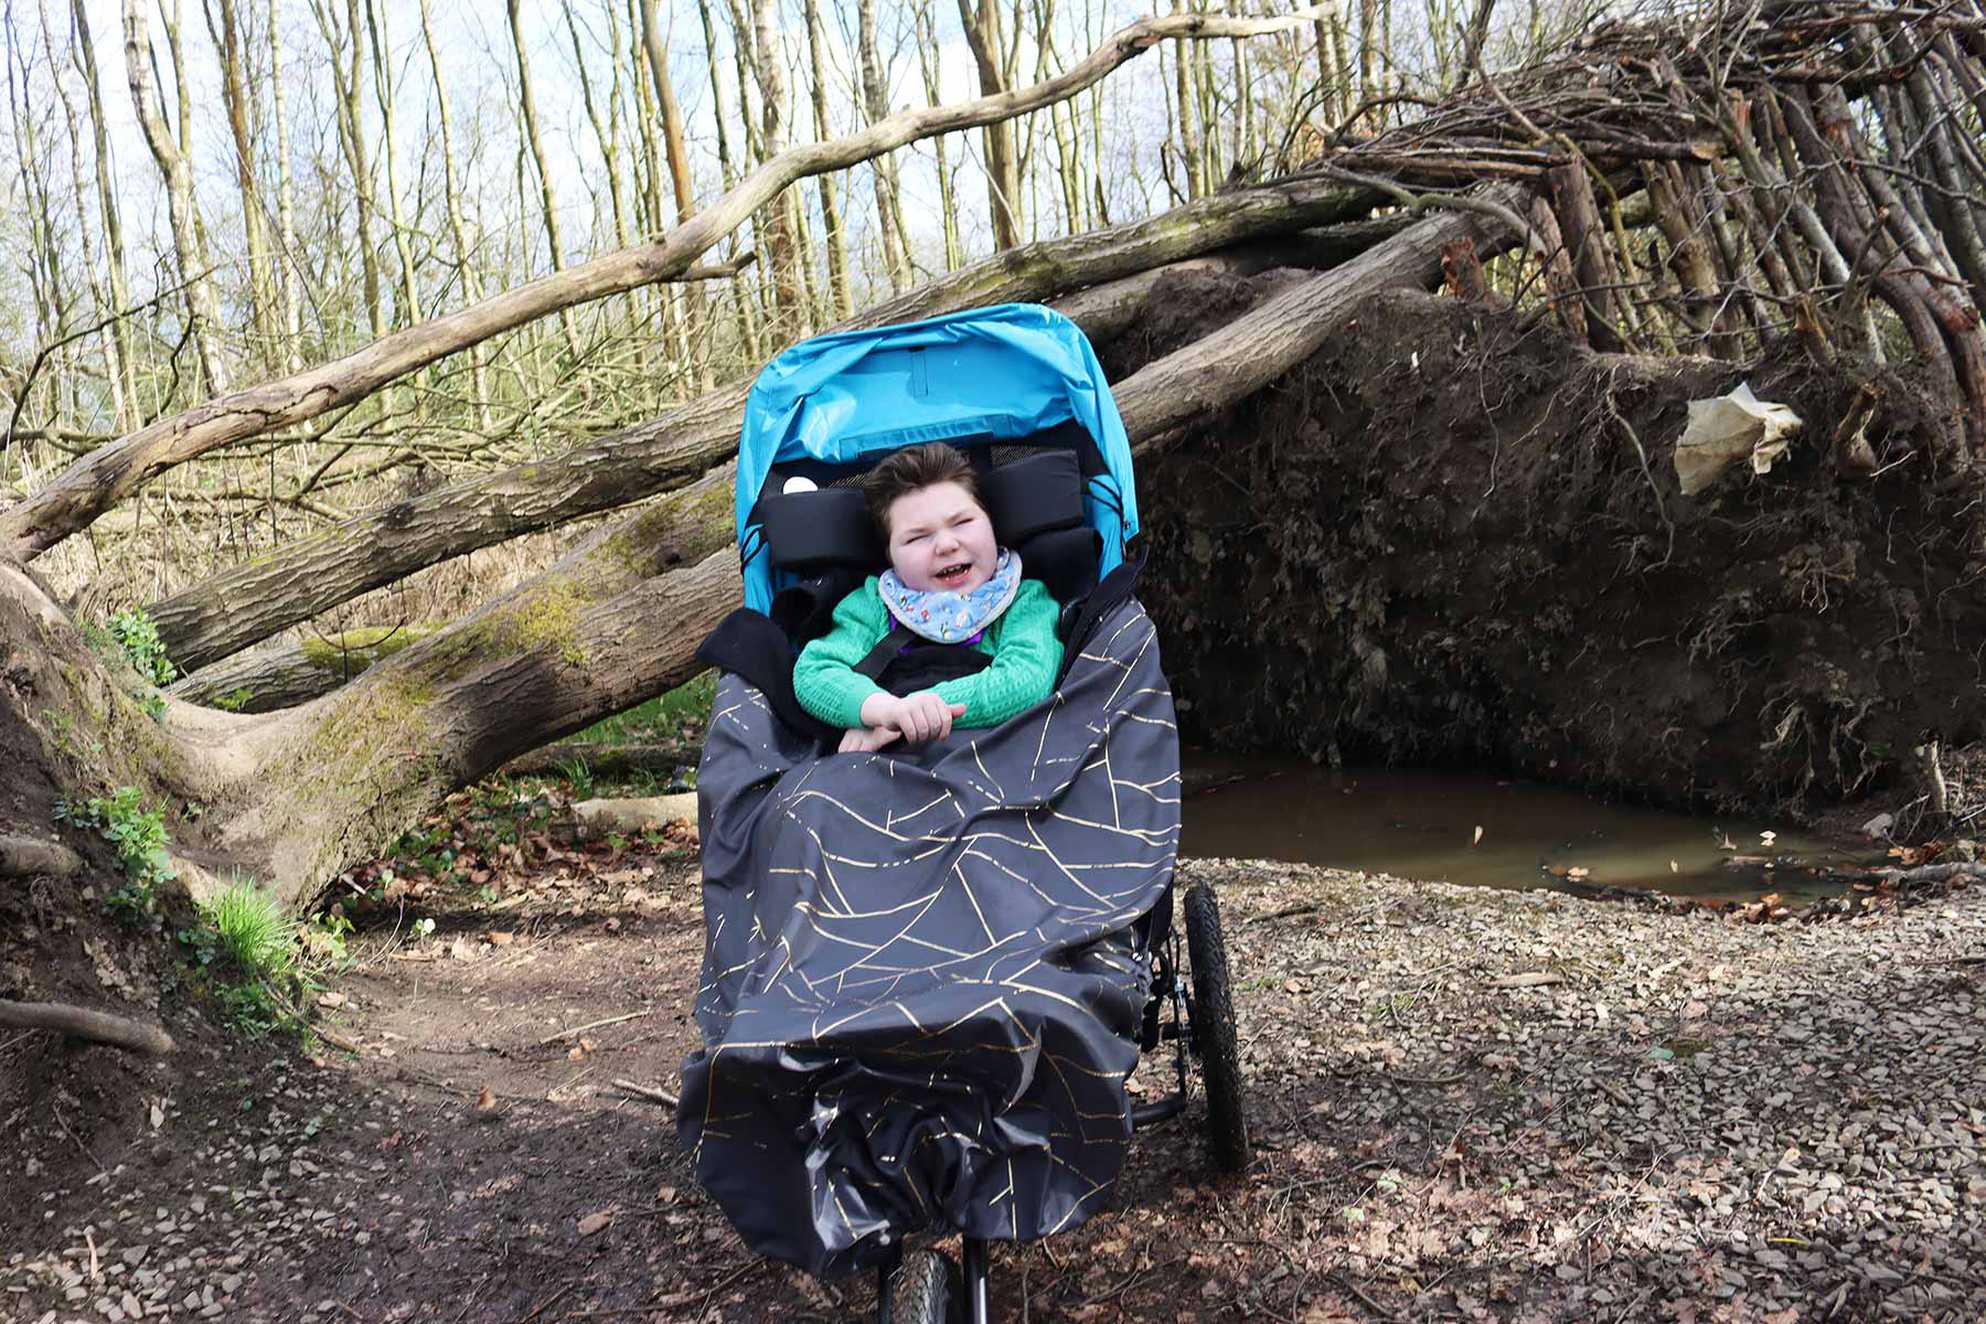 Zachariah exploring the local woods in his new buggy.